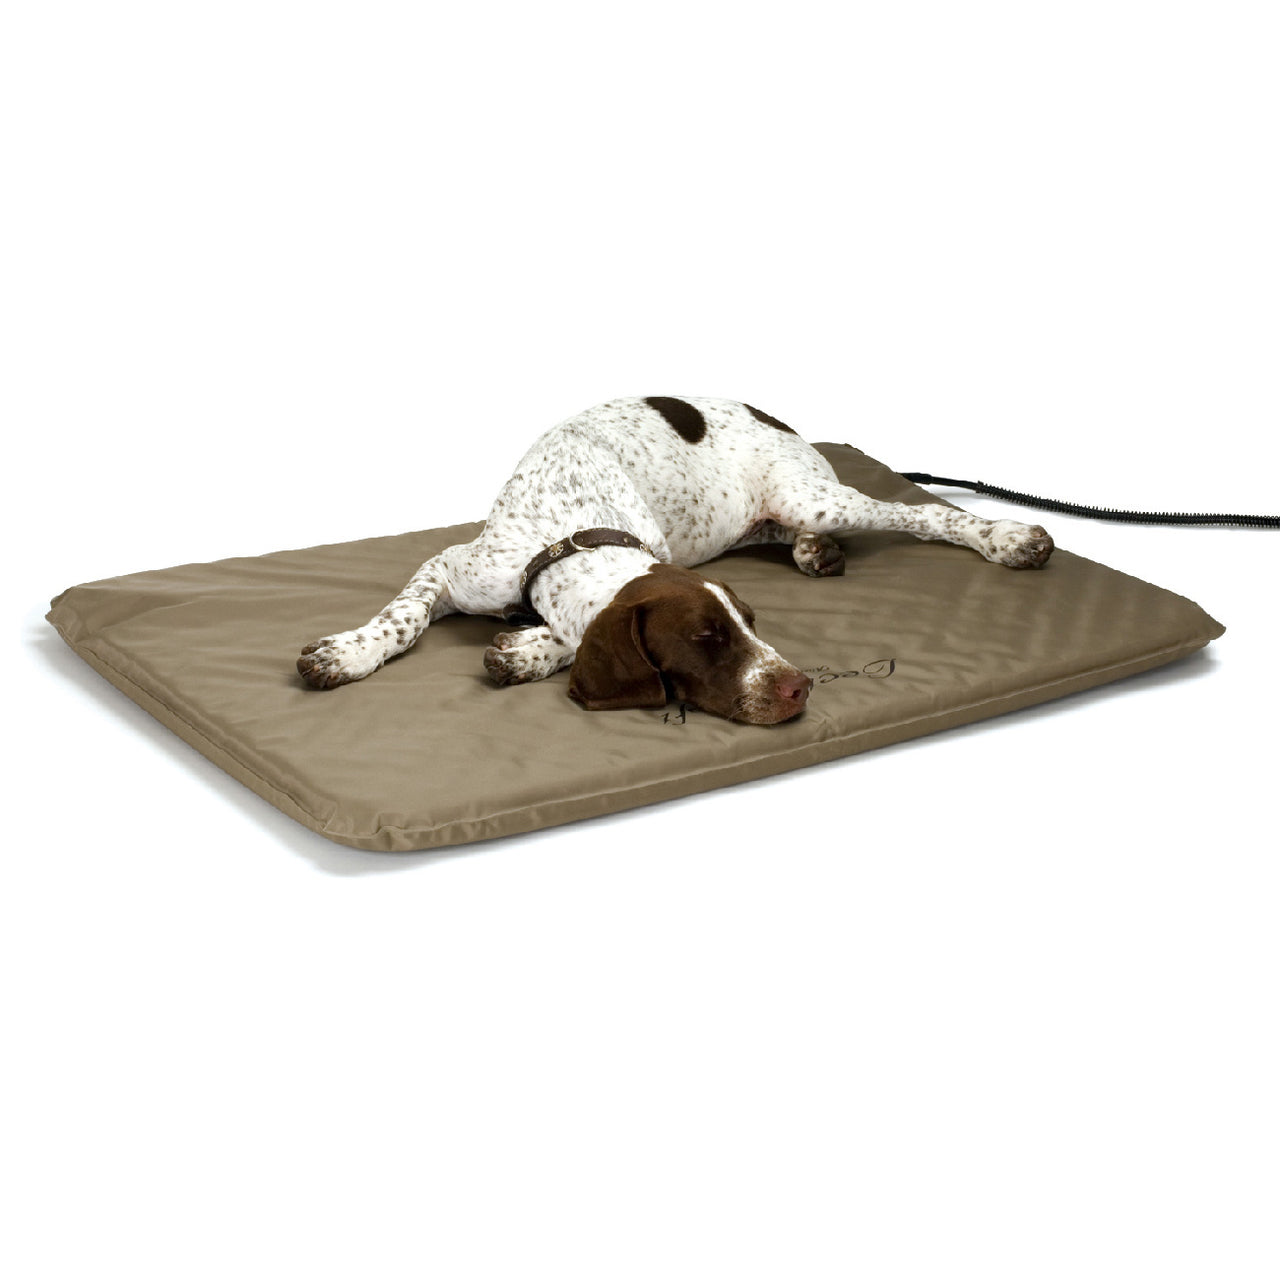 K&h Pet Products Lectro-Soft Outdoor Heated Bed & Cover Chocolate/tan (Large-80W) - Lectro-Soft Outdoor Heated Pad & Cover K&h Pet Products